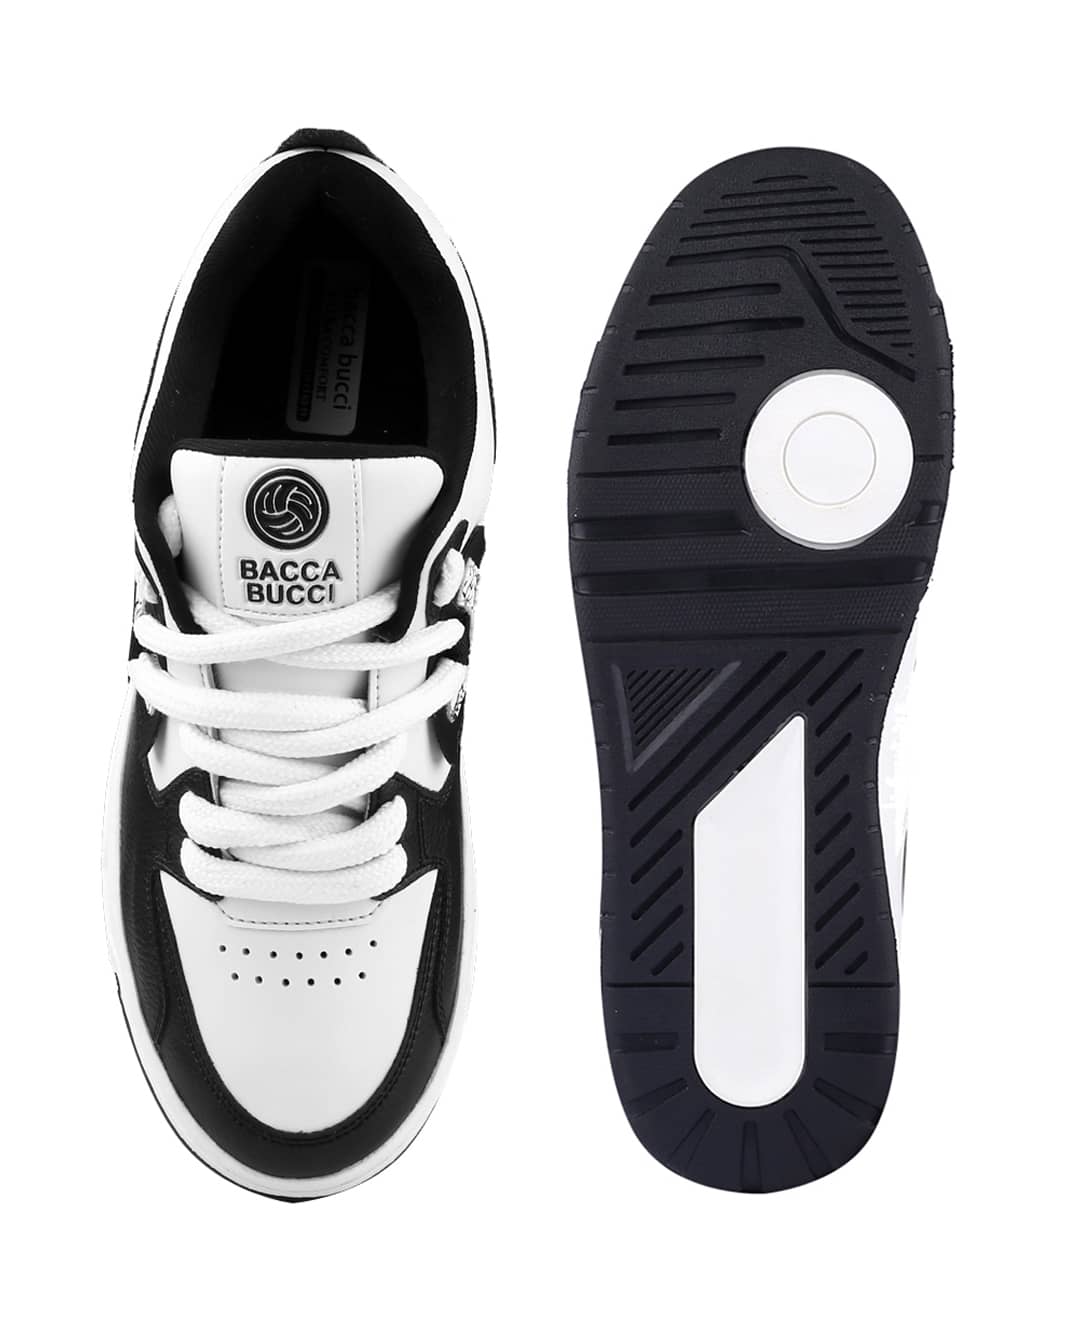 Bacca Bucci Stride Eclipse: Low-Top Flat-Sole Sneakers with Signature Thick Round Laces and Luxe Leather Finish